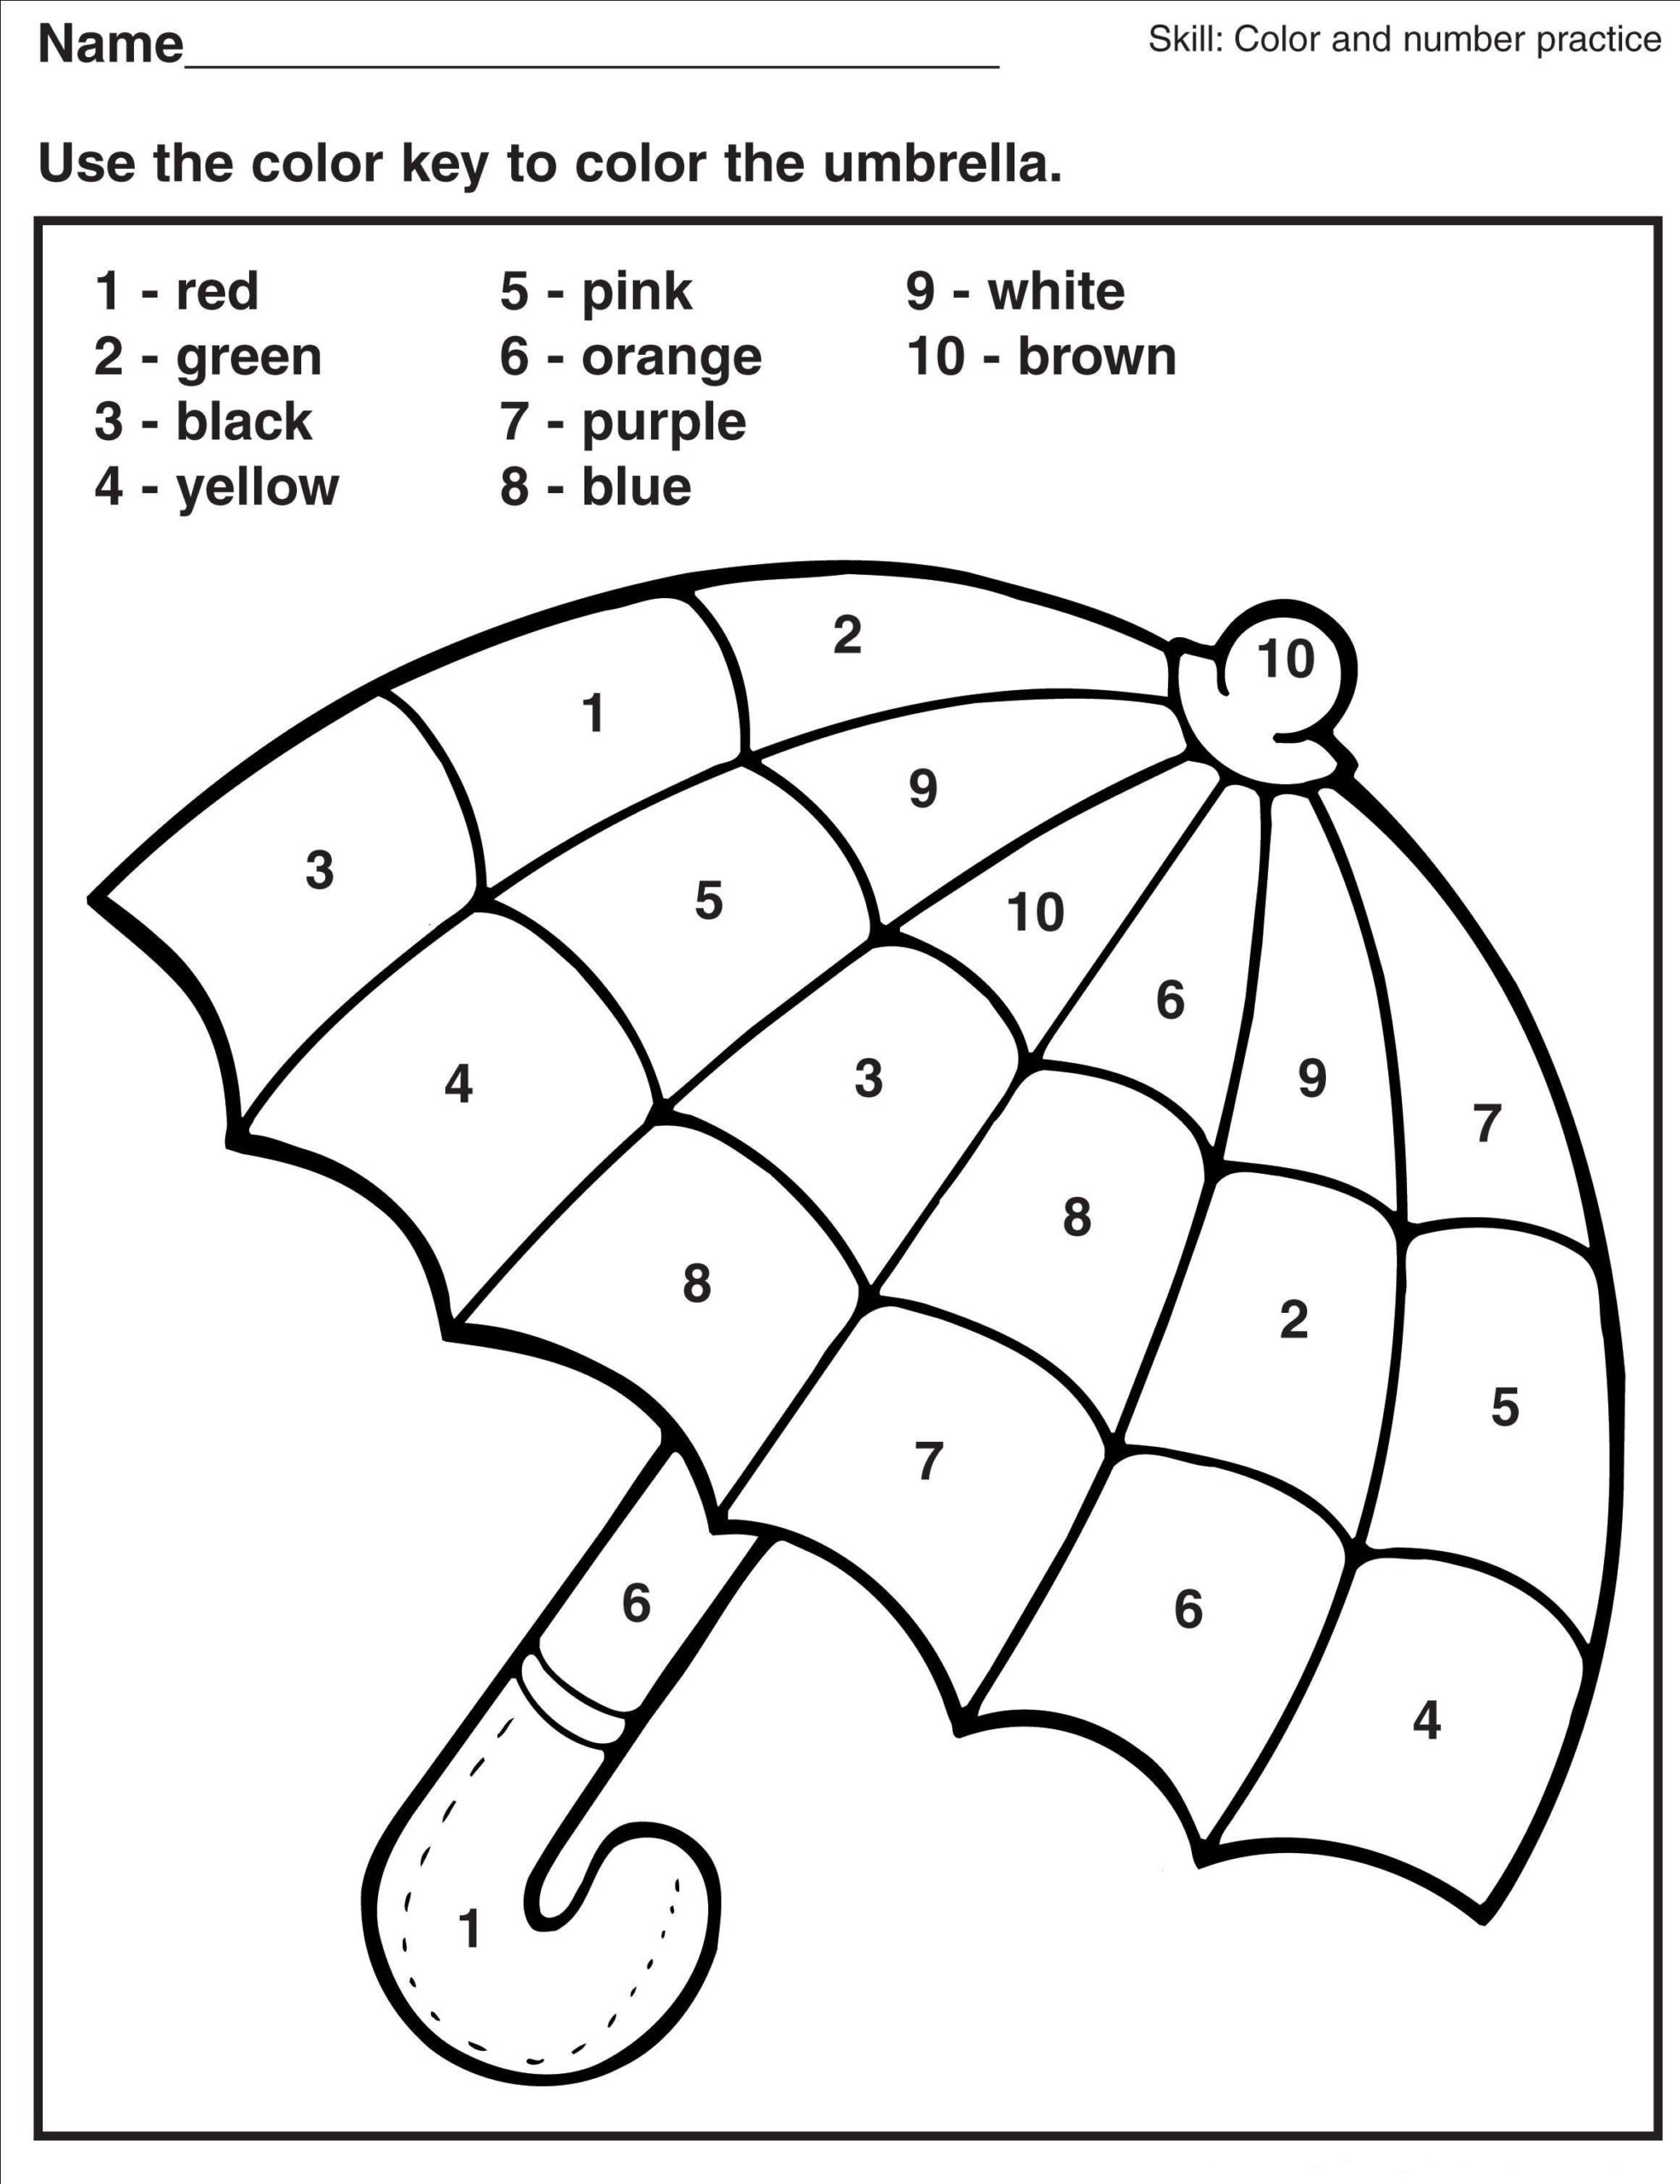 Coloring Pages : Free Printable Color By Number Coloring ...